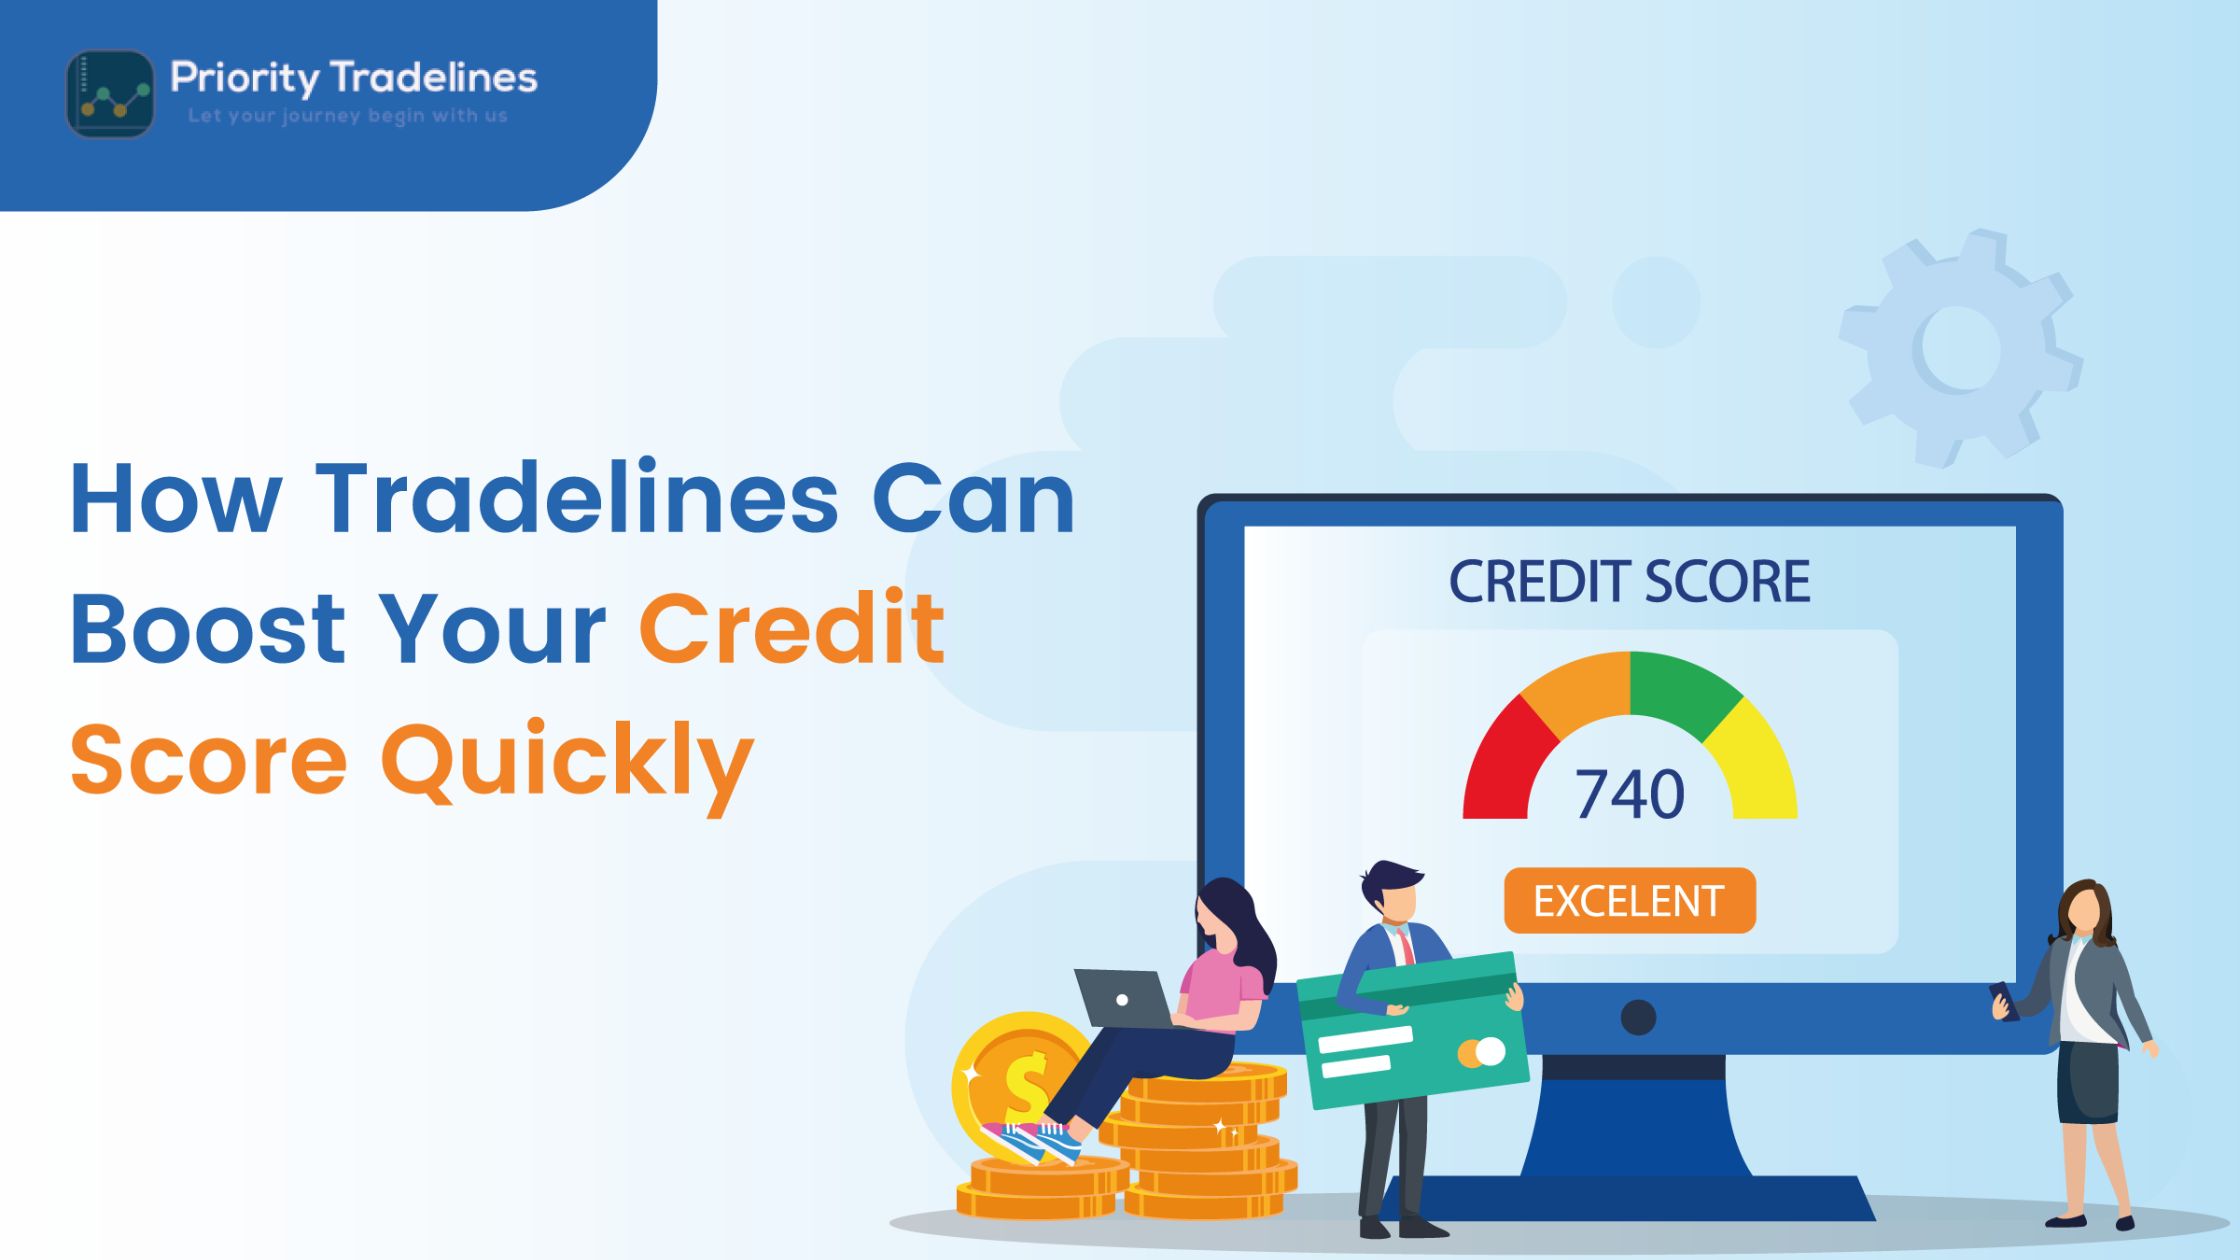 How Tradelines Can Boost Your Credit Score Quickly?